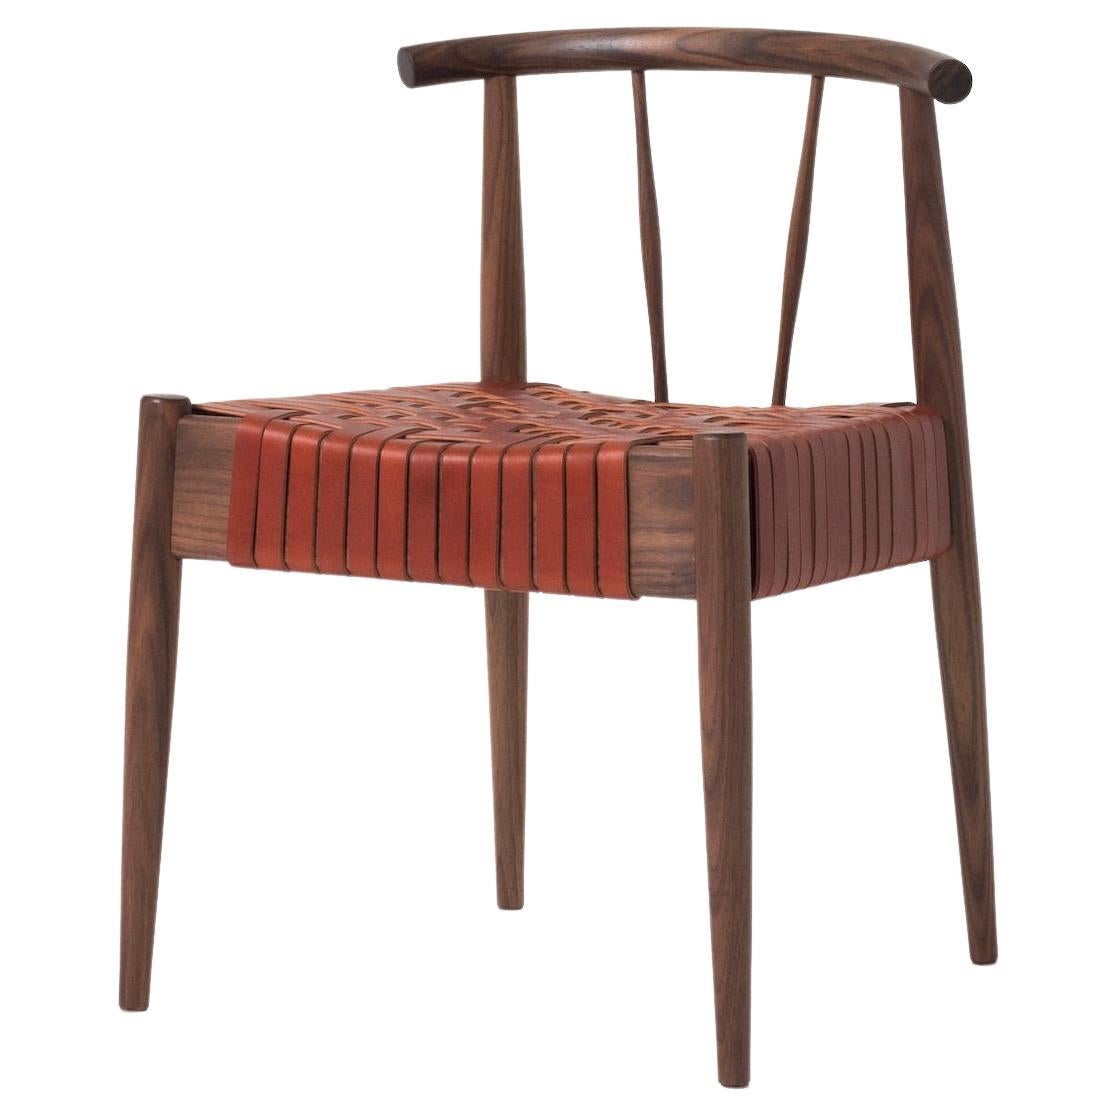 Neil Chair, Modern Wood and Leather Weave Dining Chair